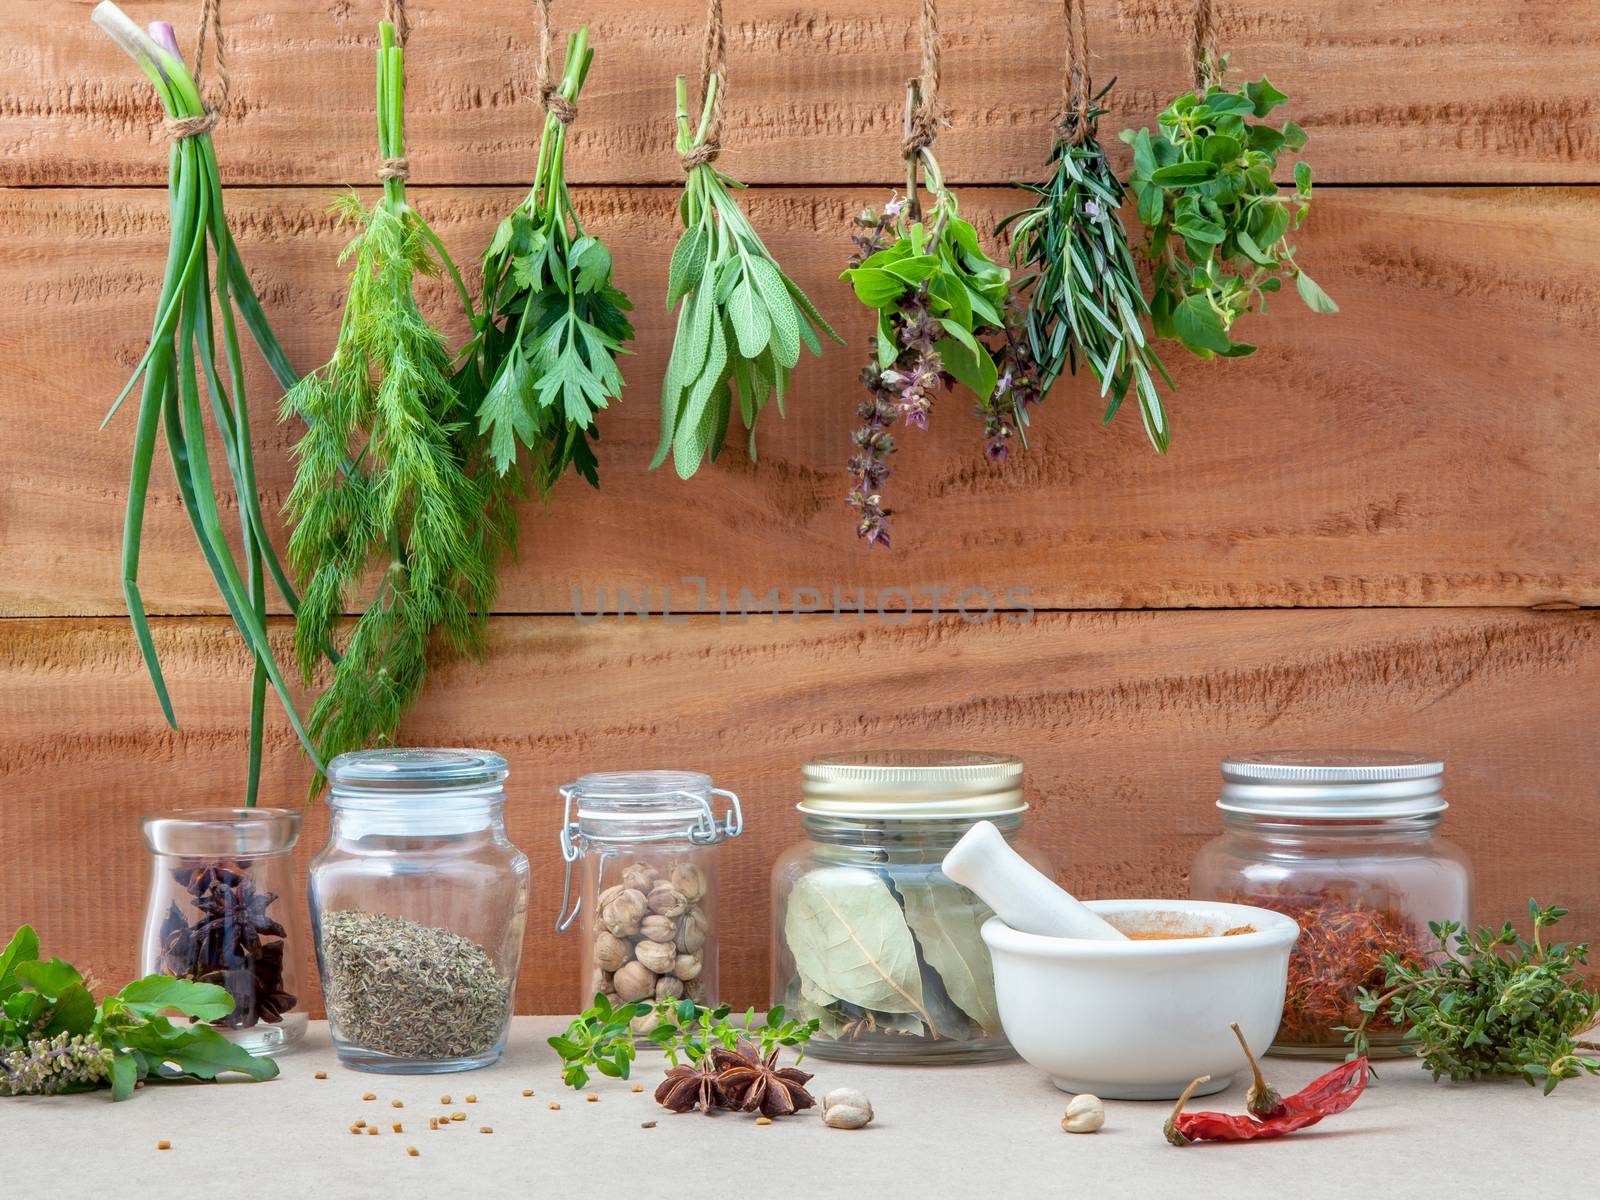 Assorted hanging herbs ,parsley ,oregano,sage,rosemary,sweet basil,dill,spring onion  and  set up with dry and fresh thyme,chili,bay leaves,white mortar  and star anise  for seasoning concept on rustic old wooden background.